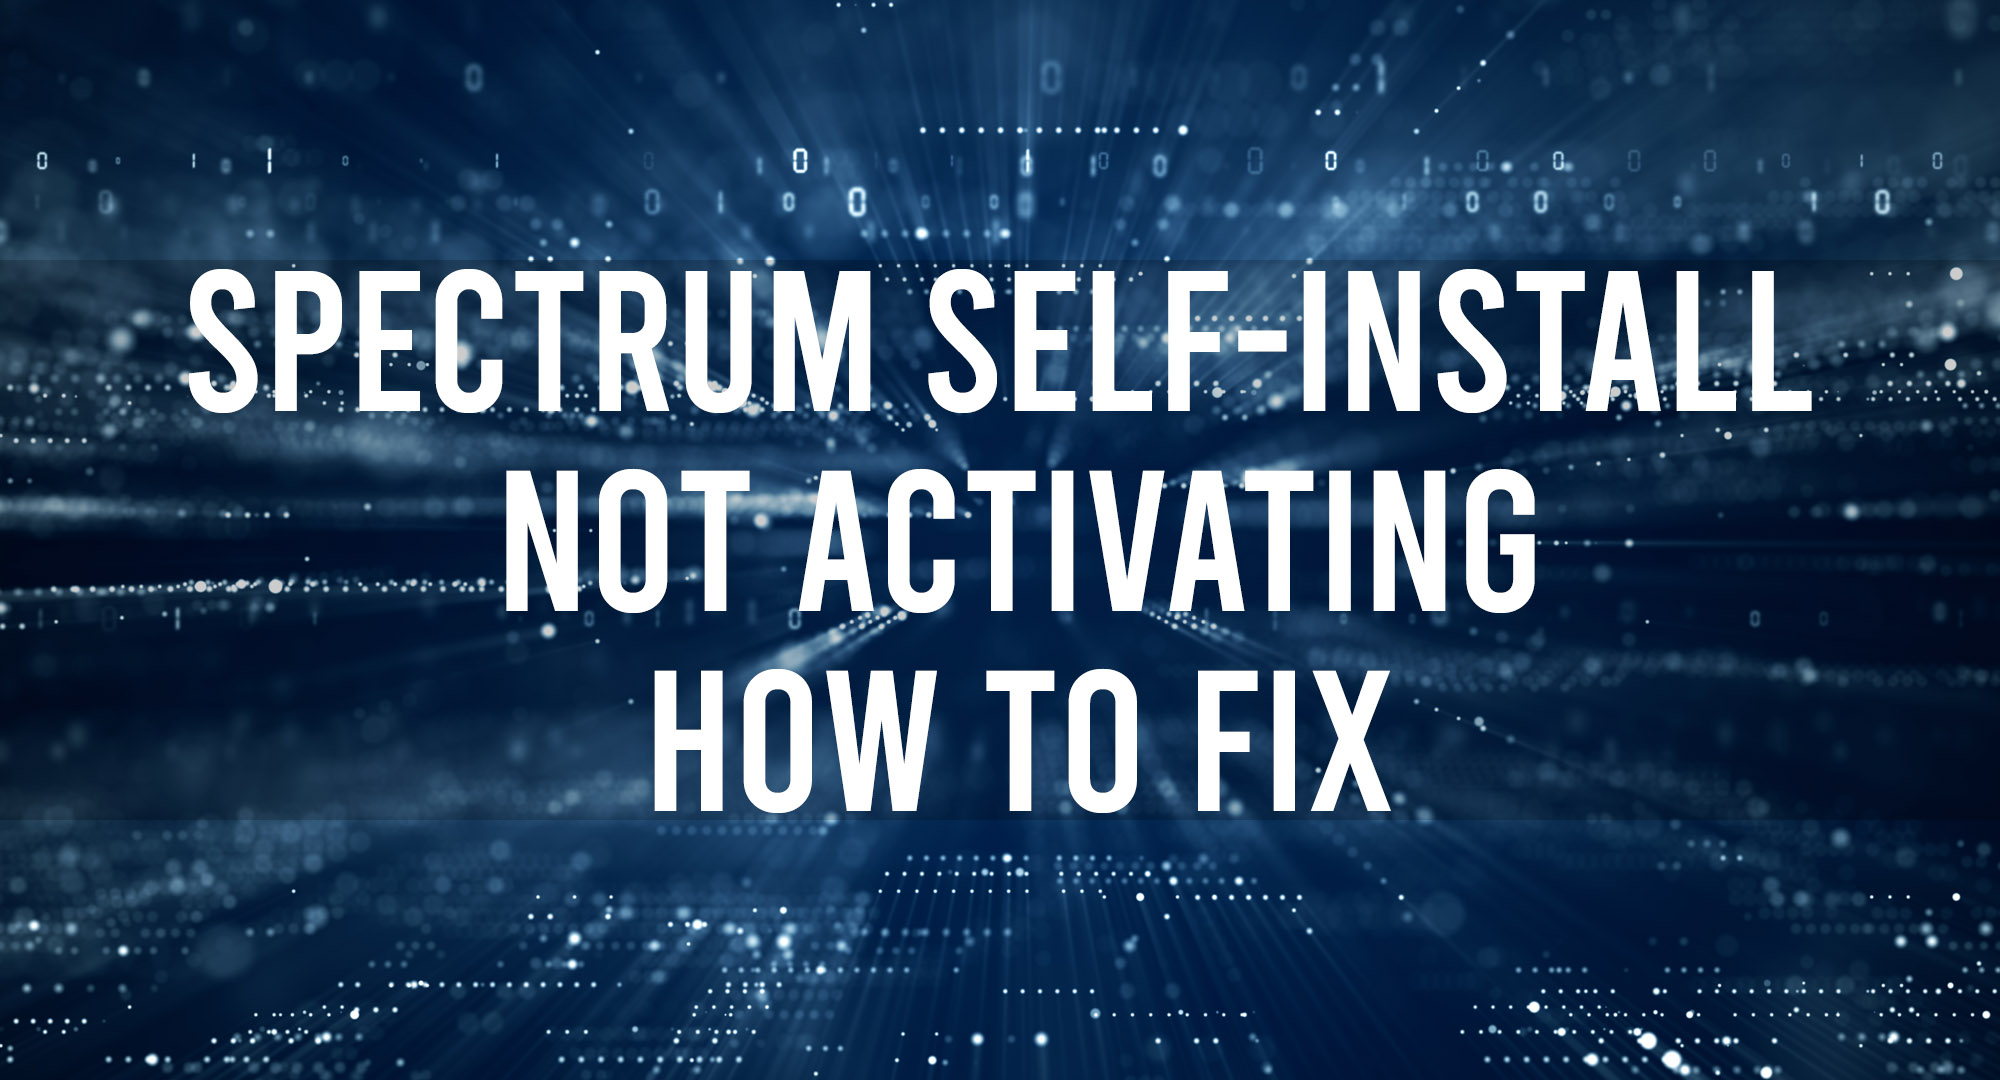 Spectrum Self-Install Not Activating - How to Fix